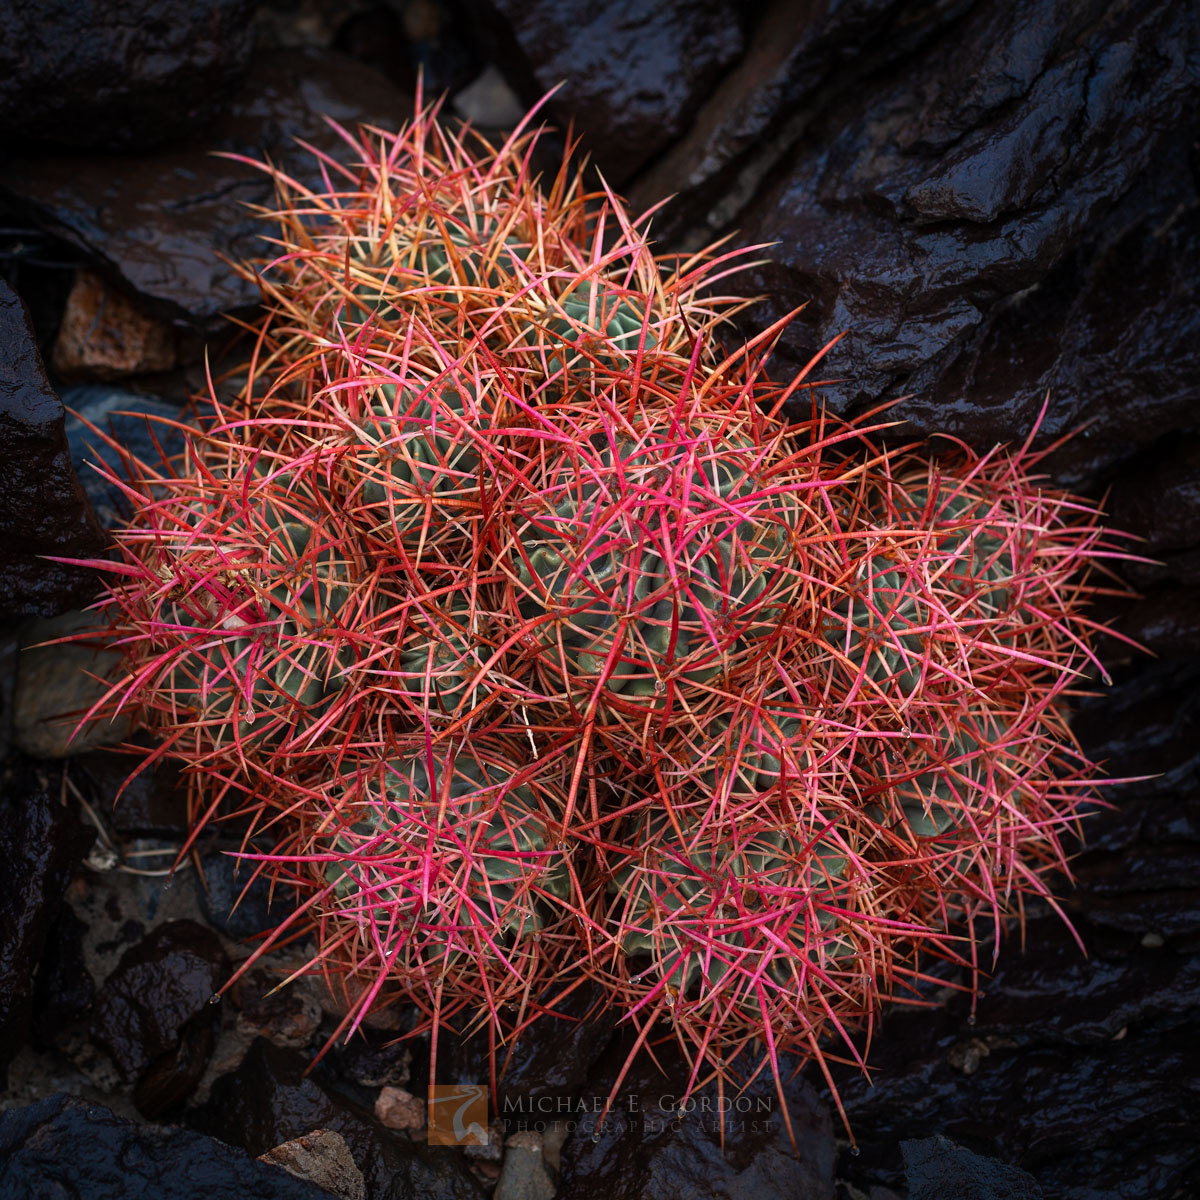 A wet and color-saturated Cottontop Cactus (Echinocactus polycephalus) atop volcanic rock&nbsp;in Saline Valley.